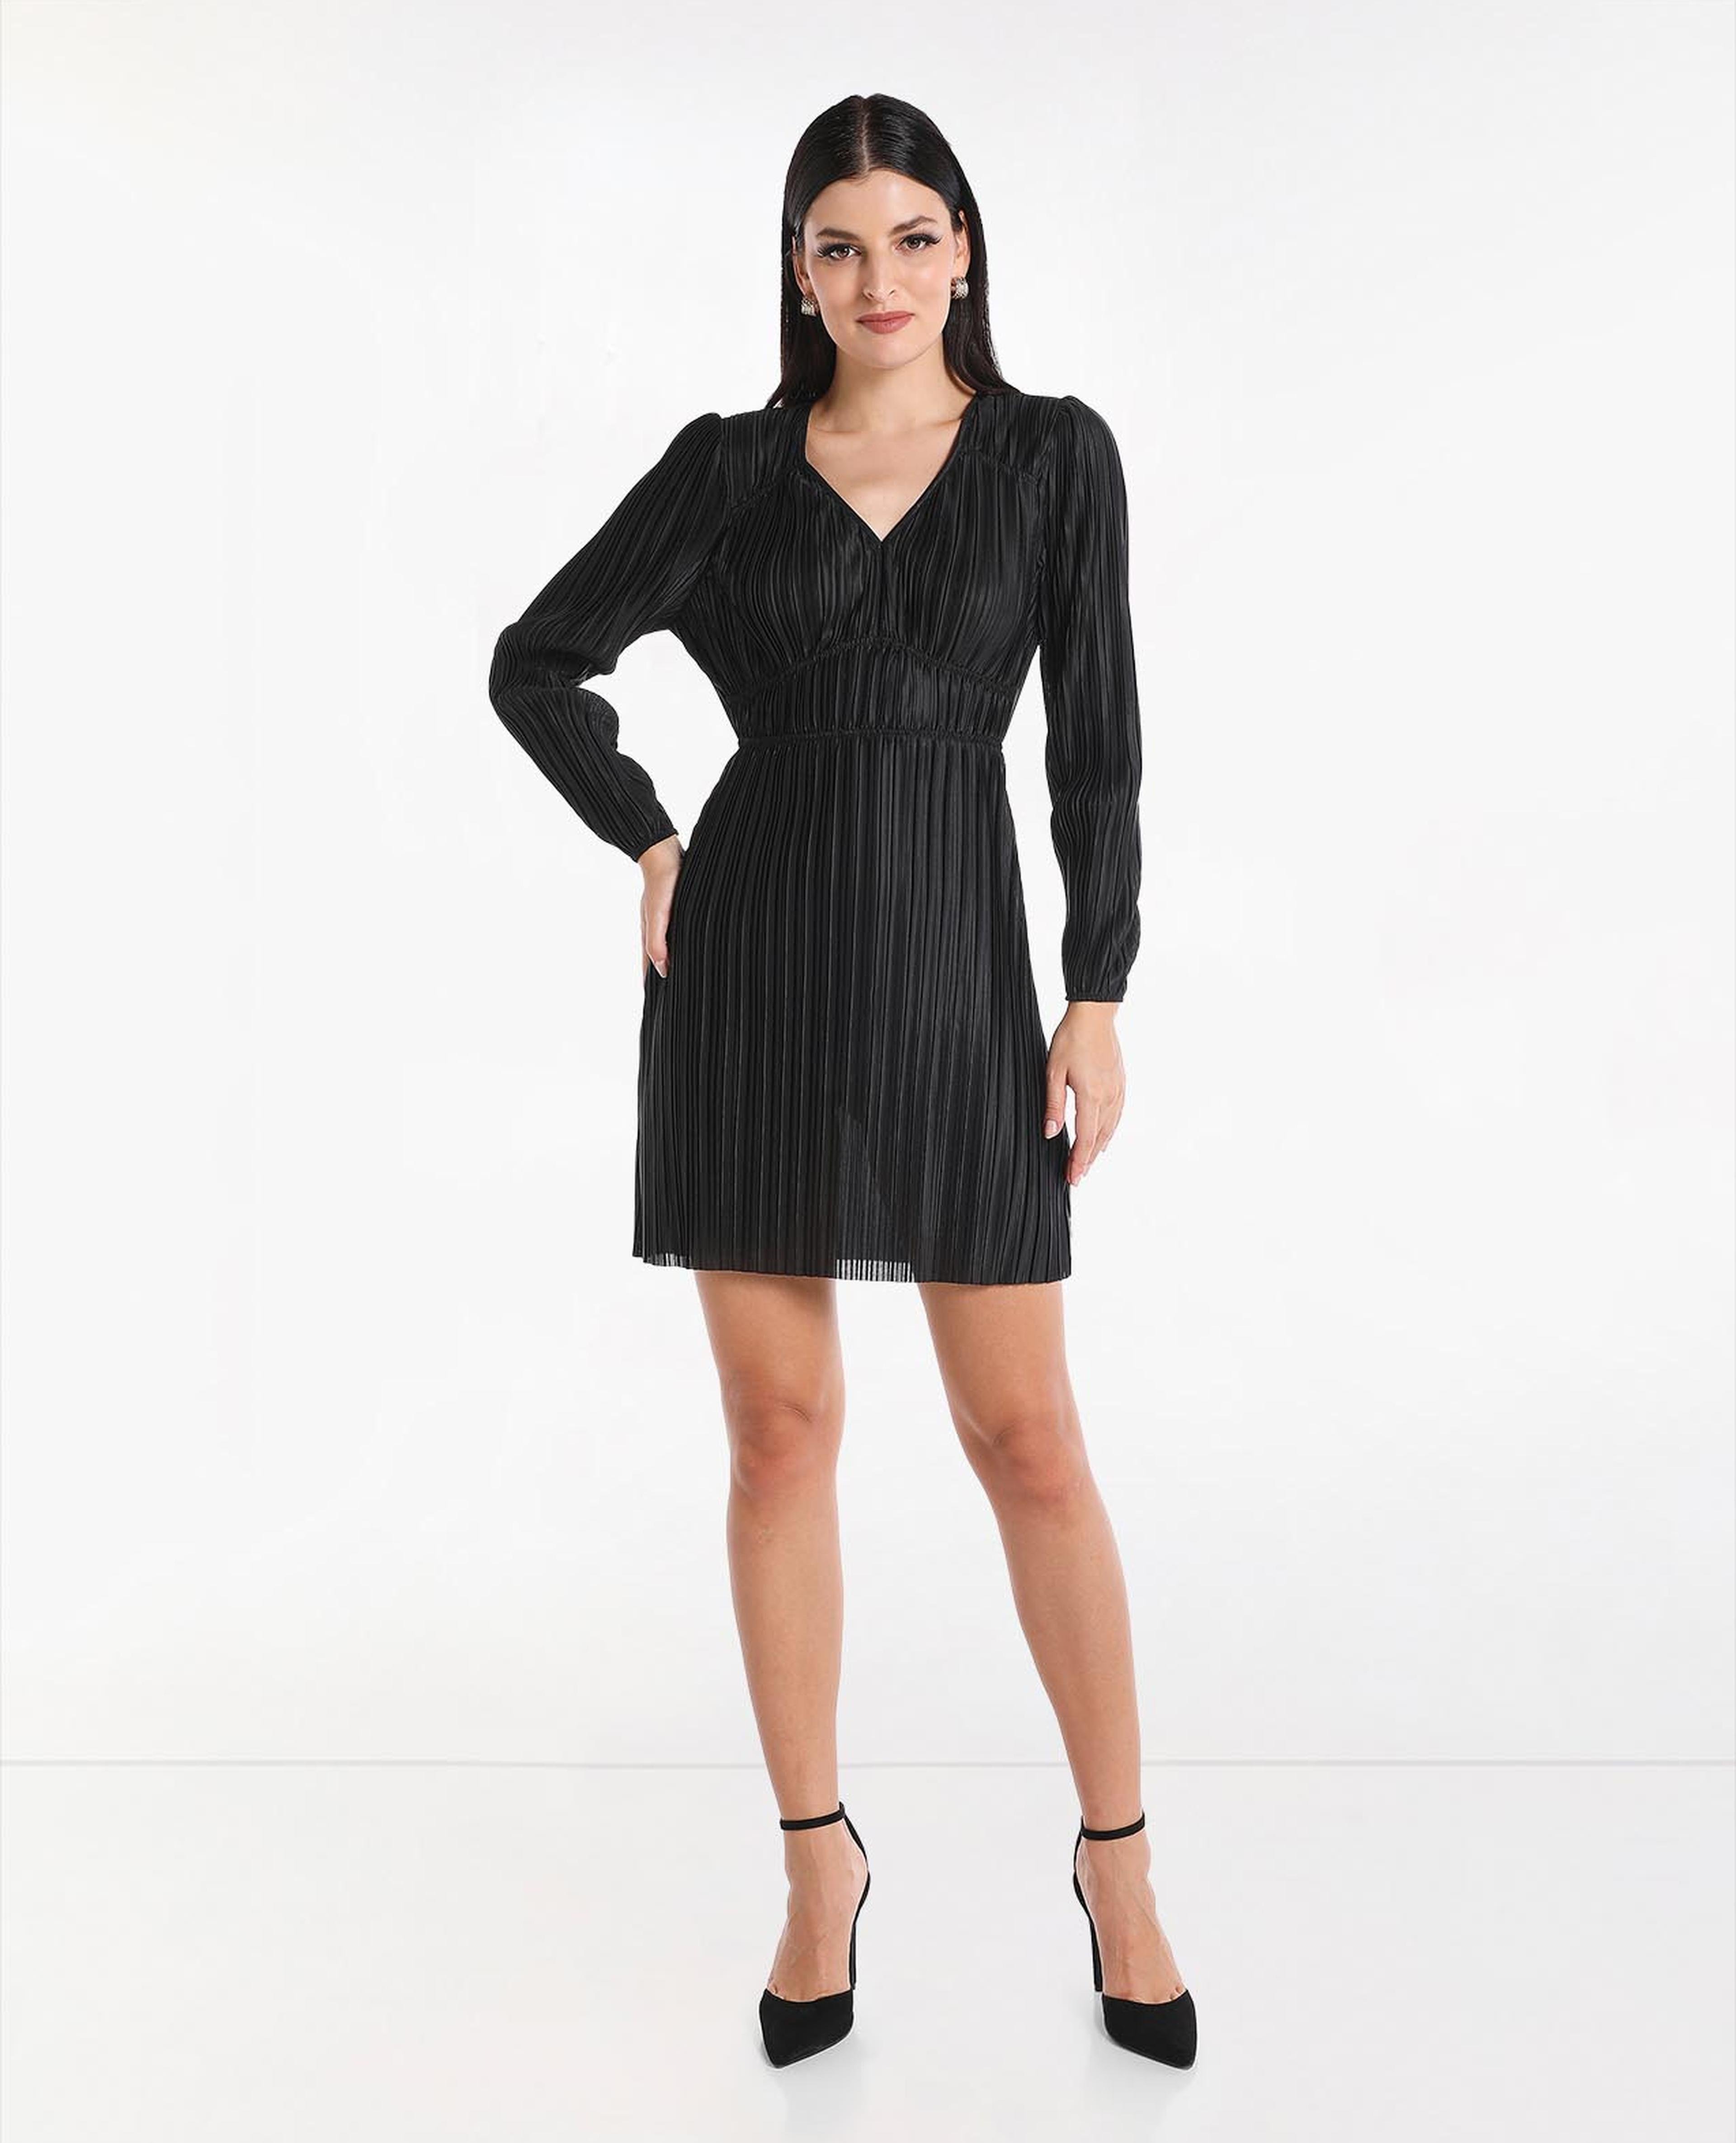 Accordian Pleated Mini Dress with V-Neck and Long Dress